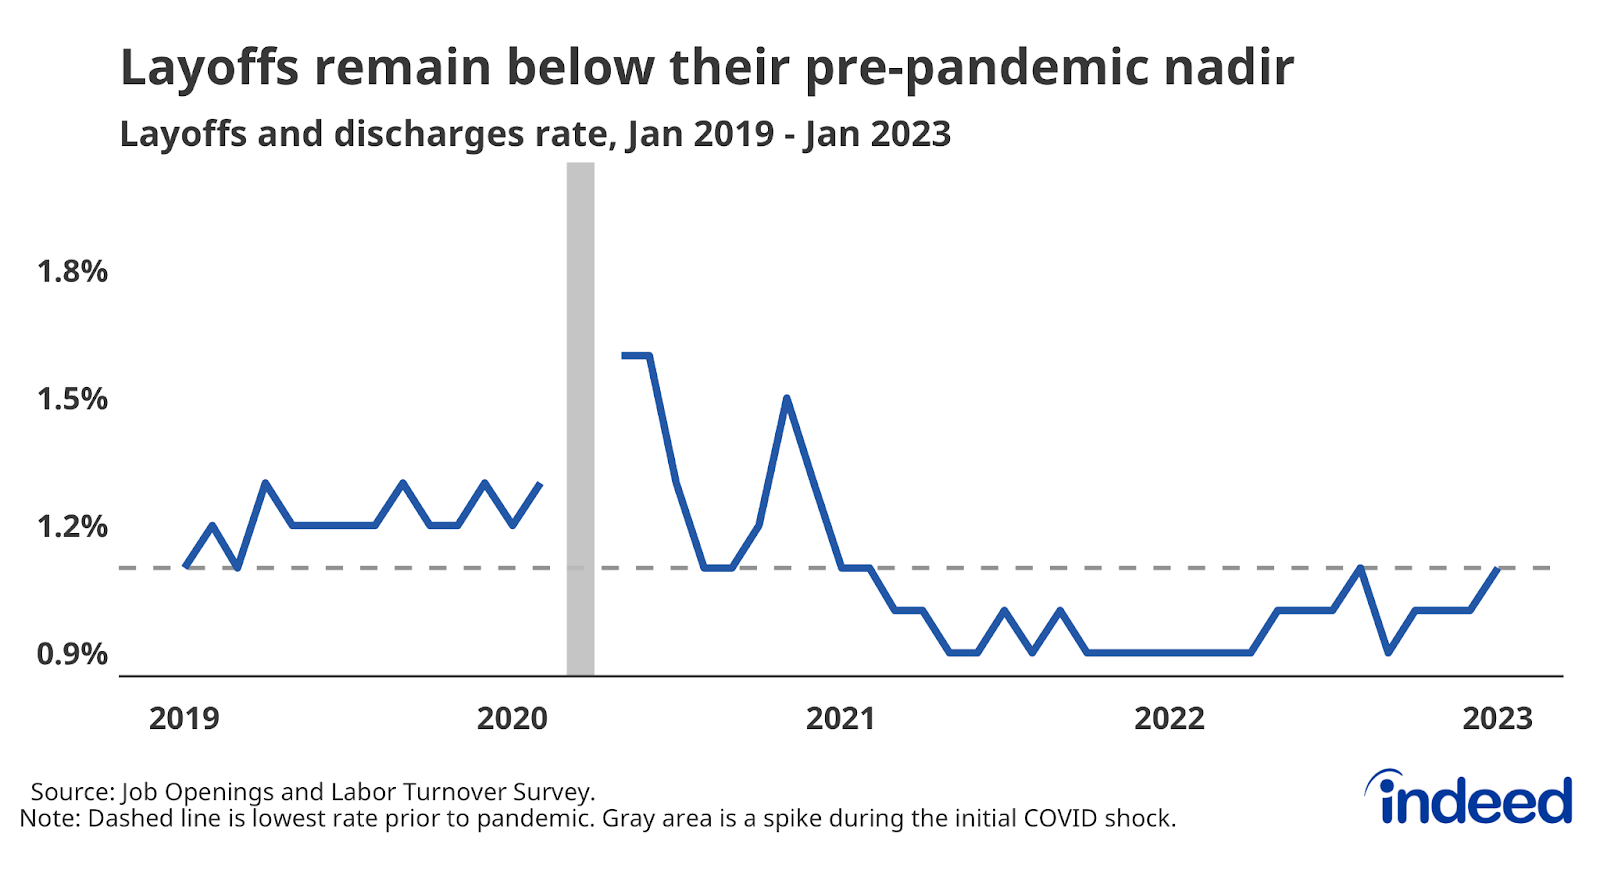 A line graph titled “Layoffs remain below their pre-pandemic nadir” covering January 2019 to January 2023. The graph shows that the layoff and discharge rate is still very low despite a mild increase in 2022.